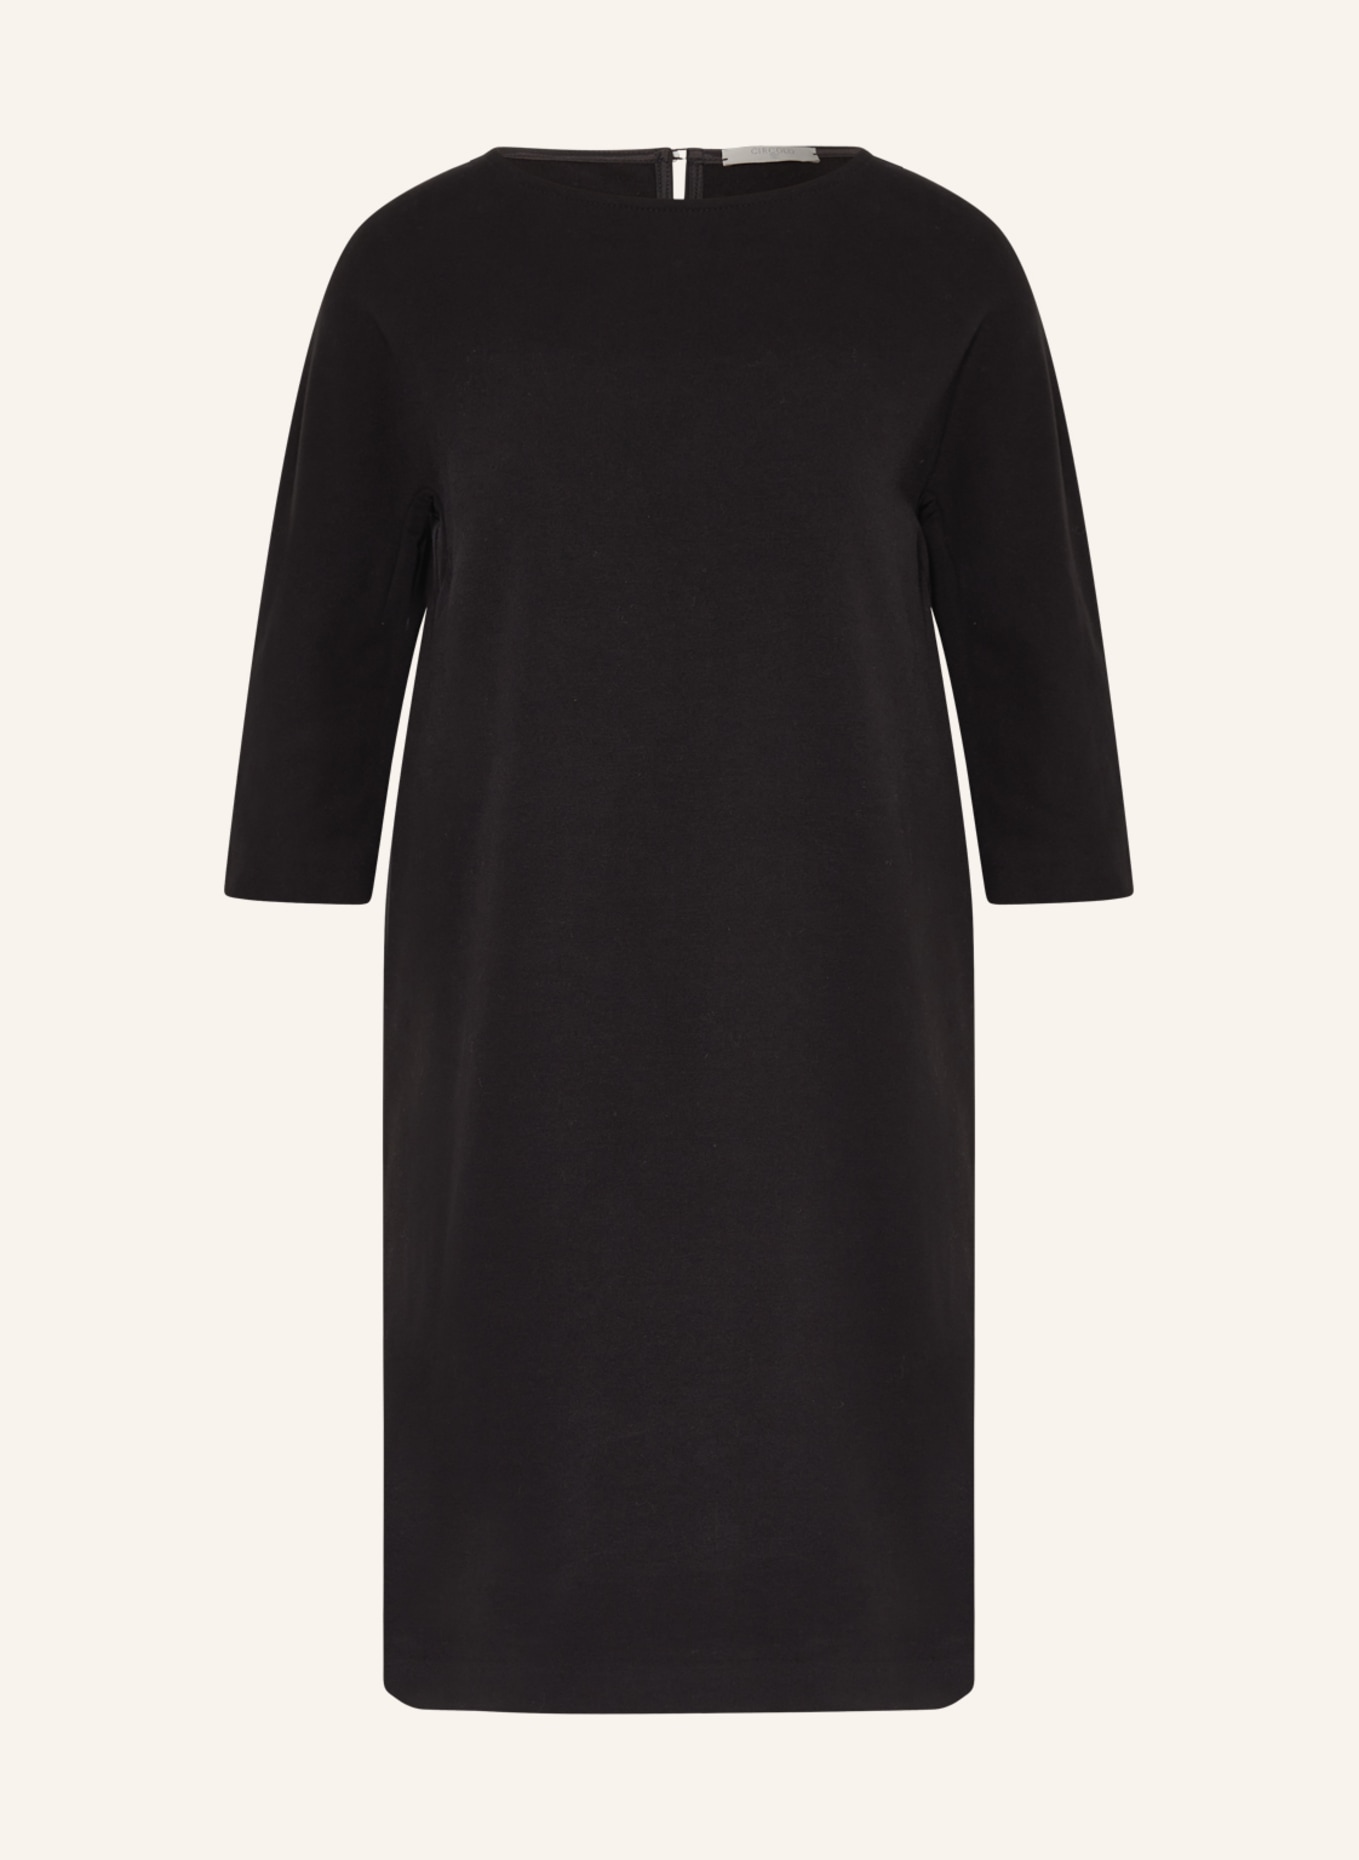 CIRCOLO 1901 Sweater dress with 3/4 sleeves, Color: BLACK (Image 1)